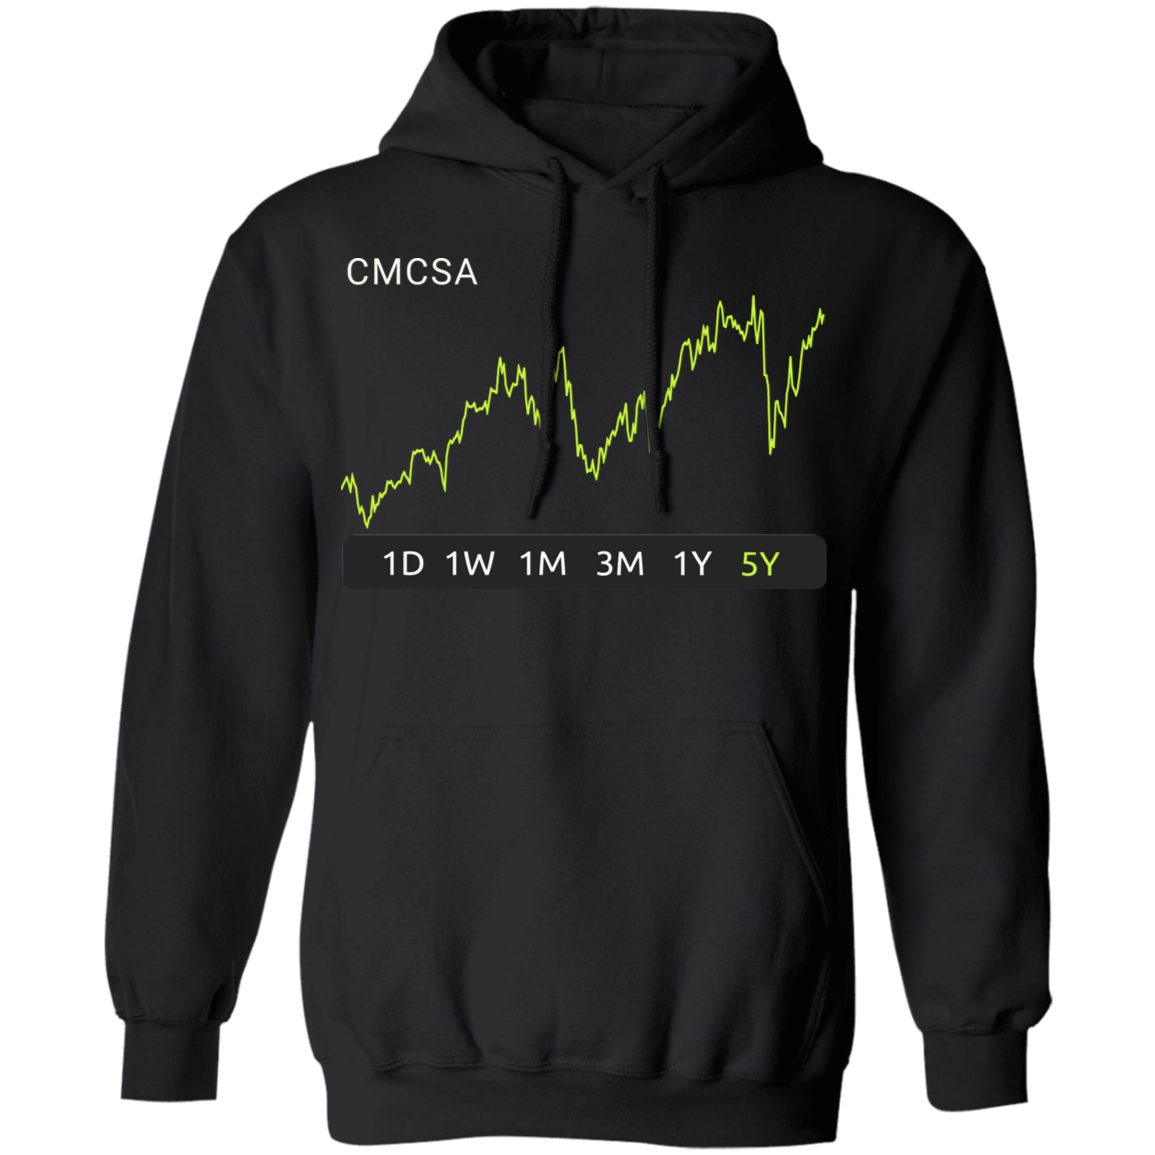 CMCSA Stock 5y Pullover Hoodie